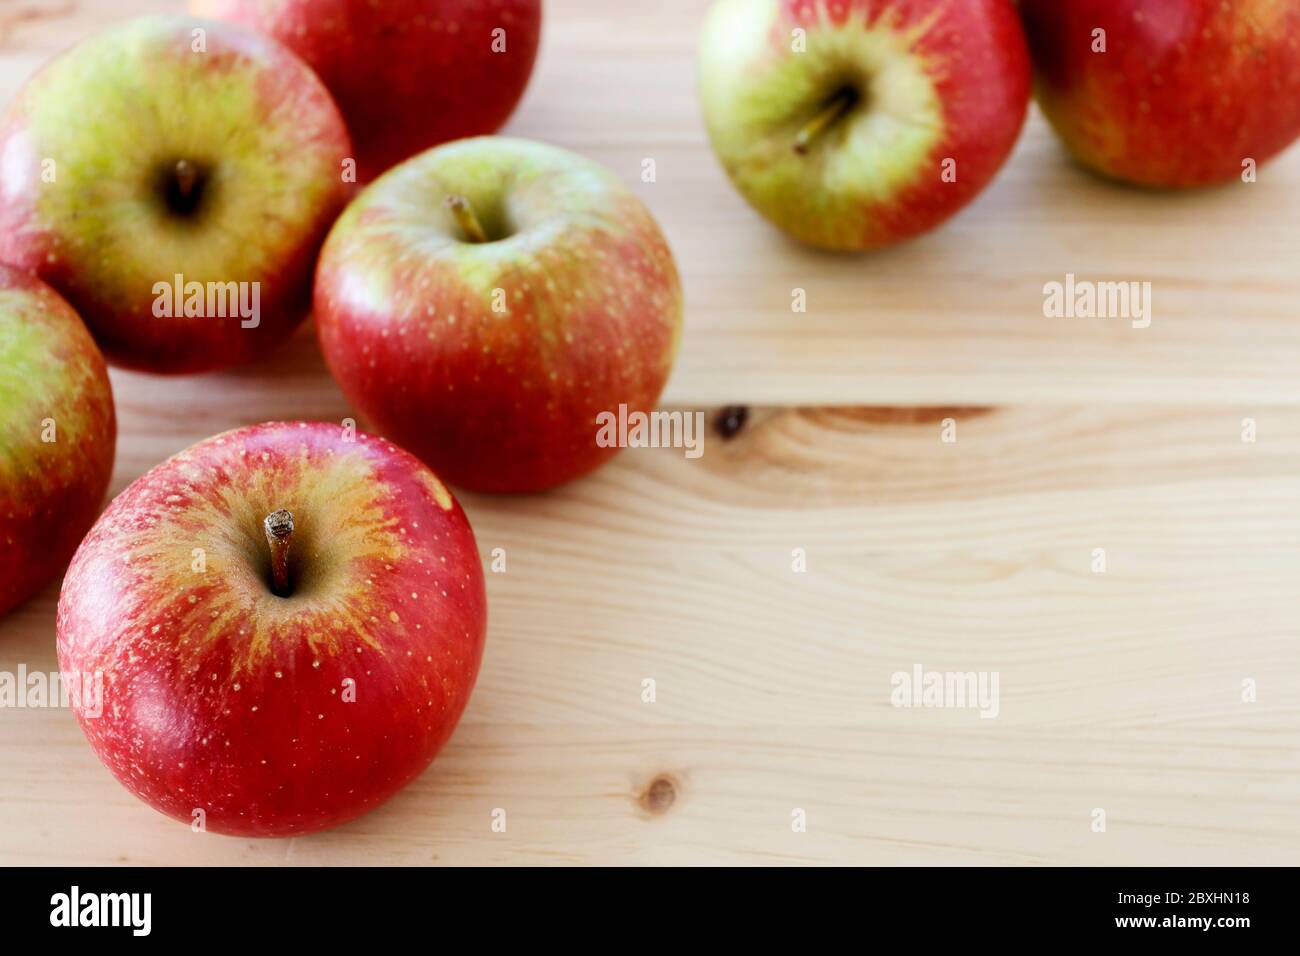 Red and yellow apples on wooden table. Healthy food Stock Photo